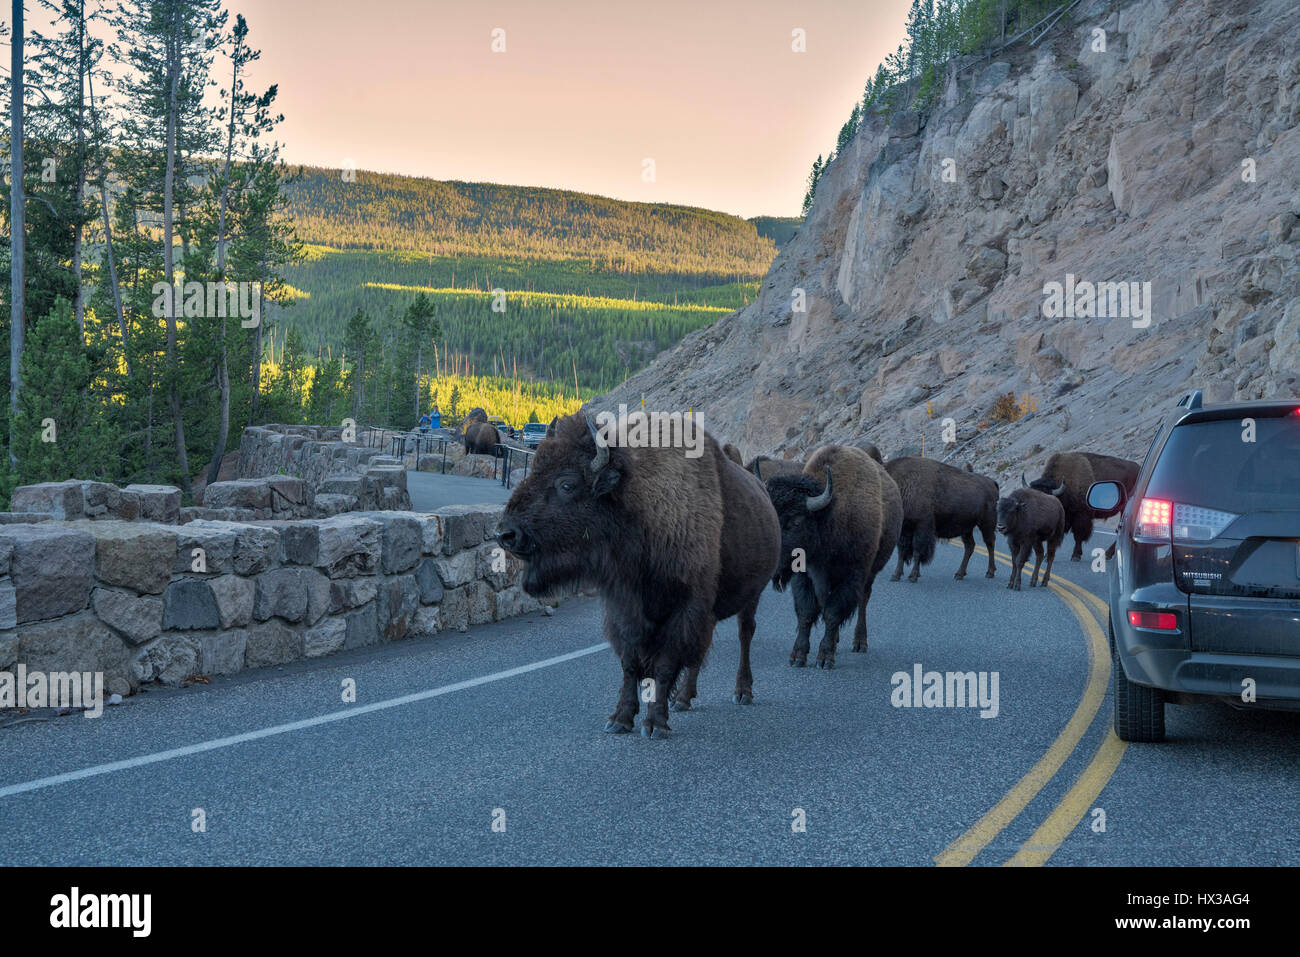 Blocage Buffalo road. Le Parc National de Yellowstone, Wyoming Banque D'Images